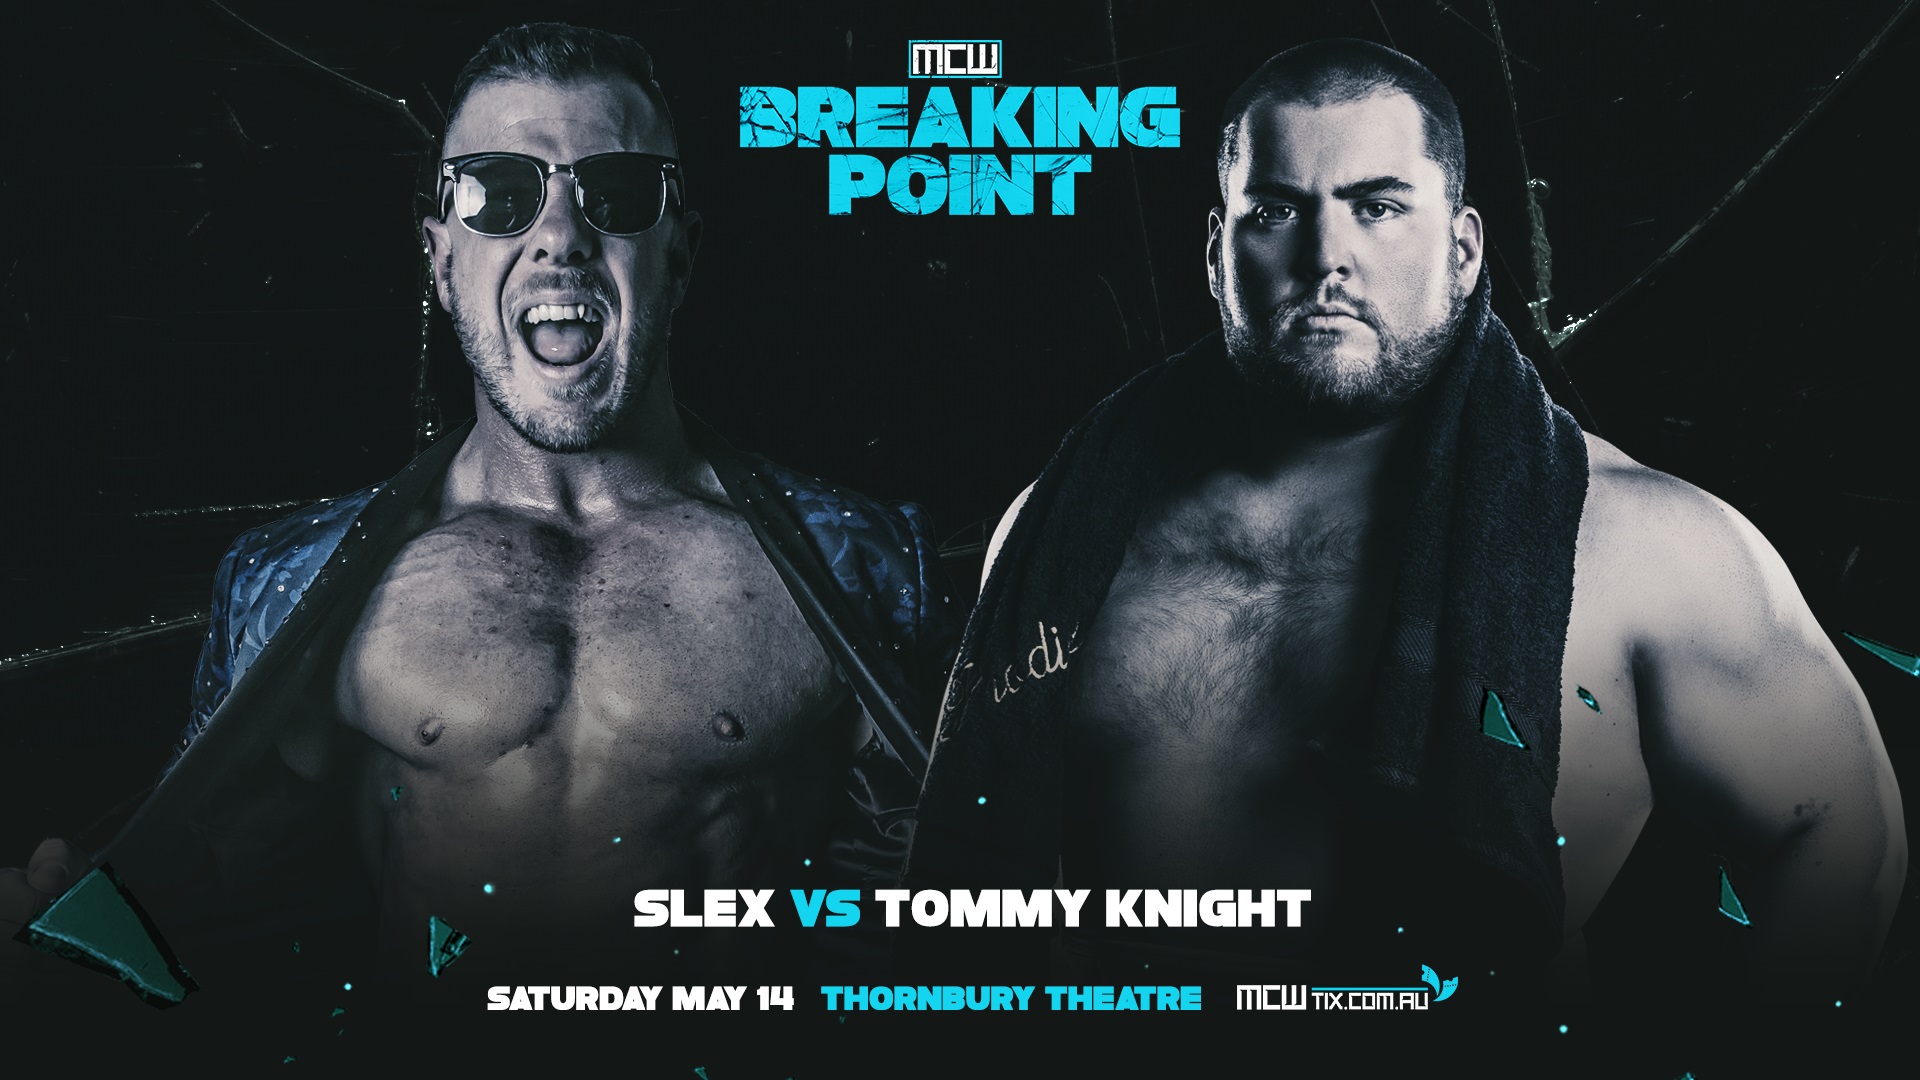 BREAKING POINT – BUSINESS VS. PRODIGY